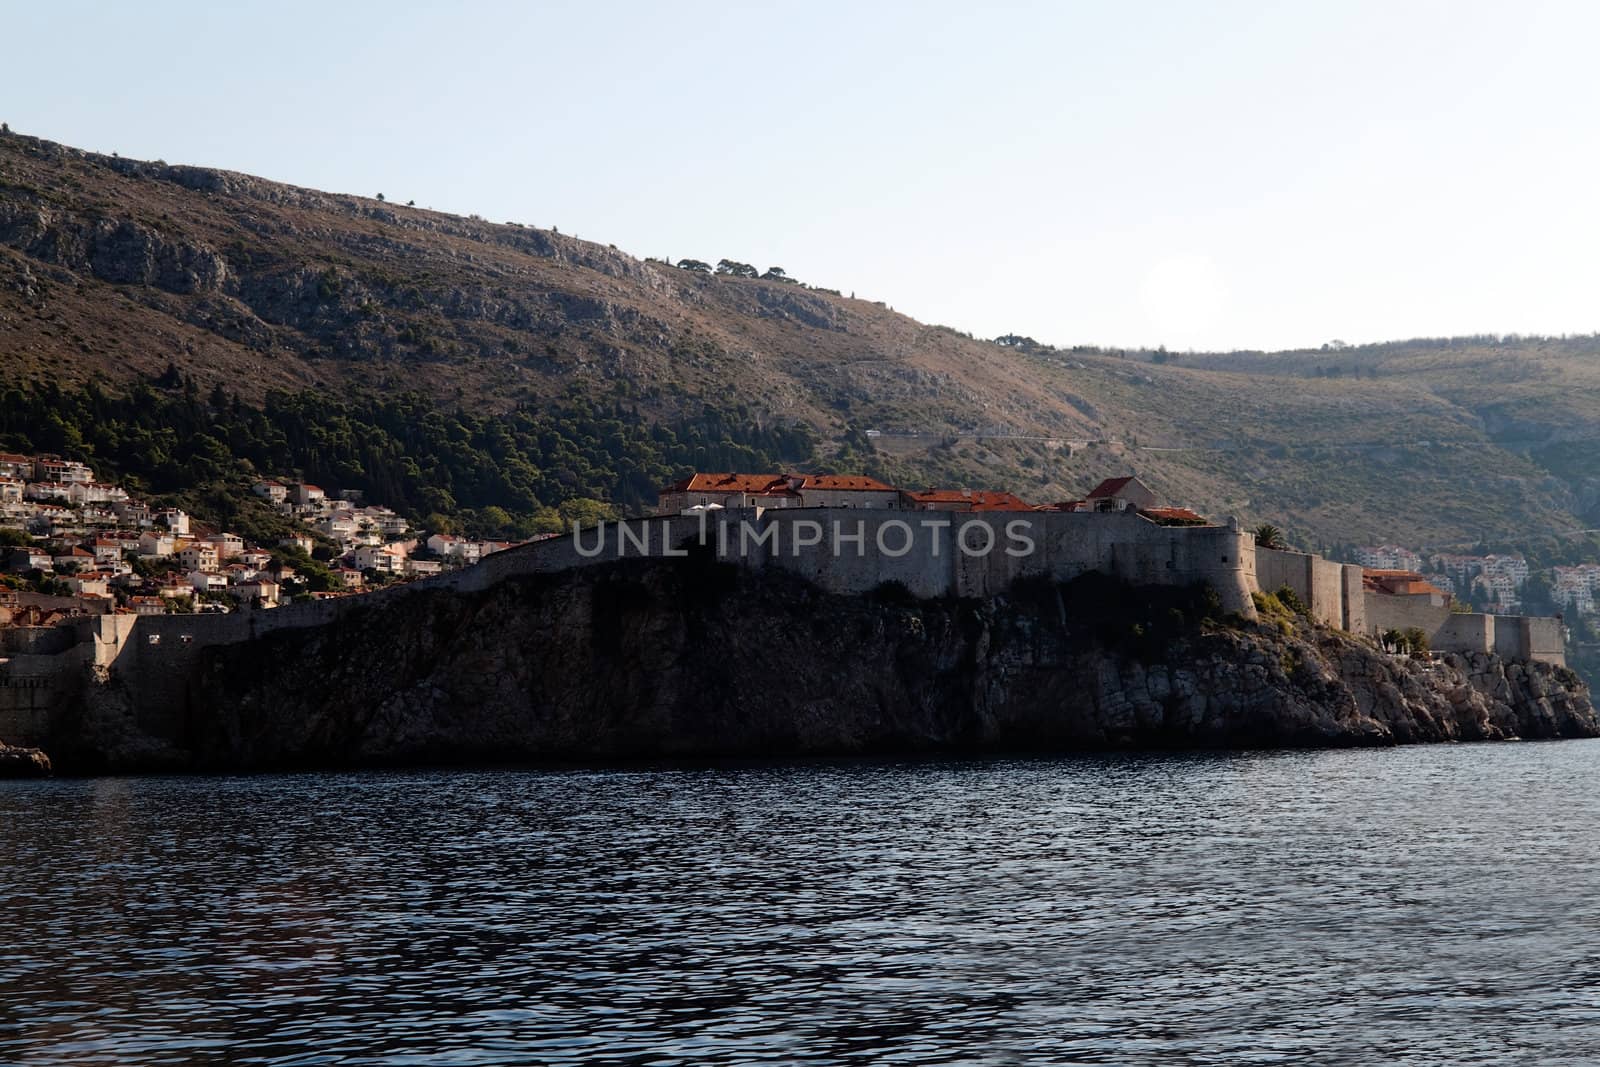 A fort built onto the cliff side of Dubrovnik, Croatia